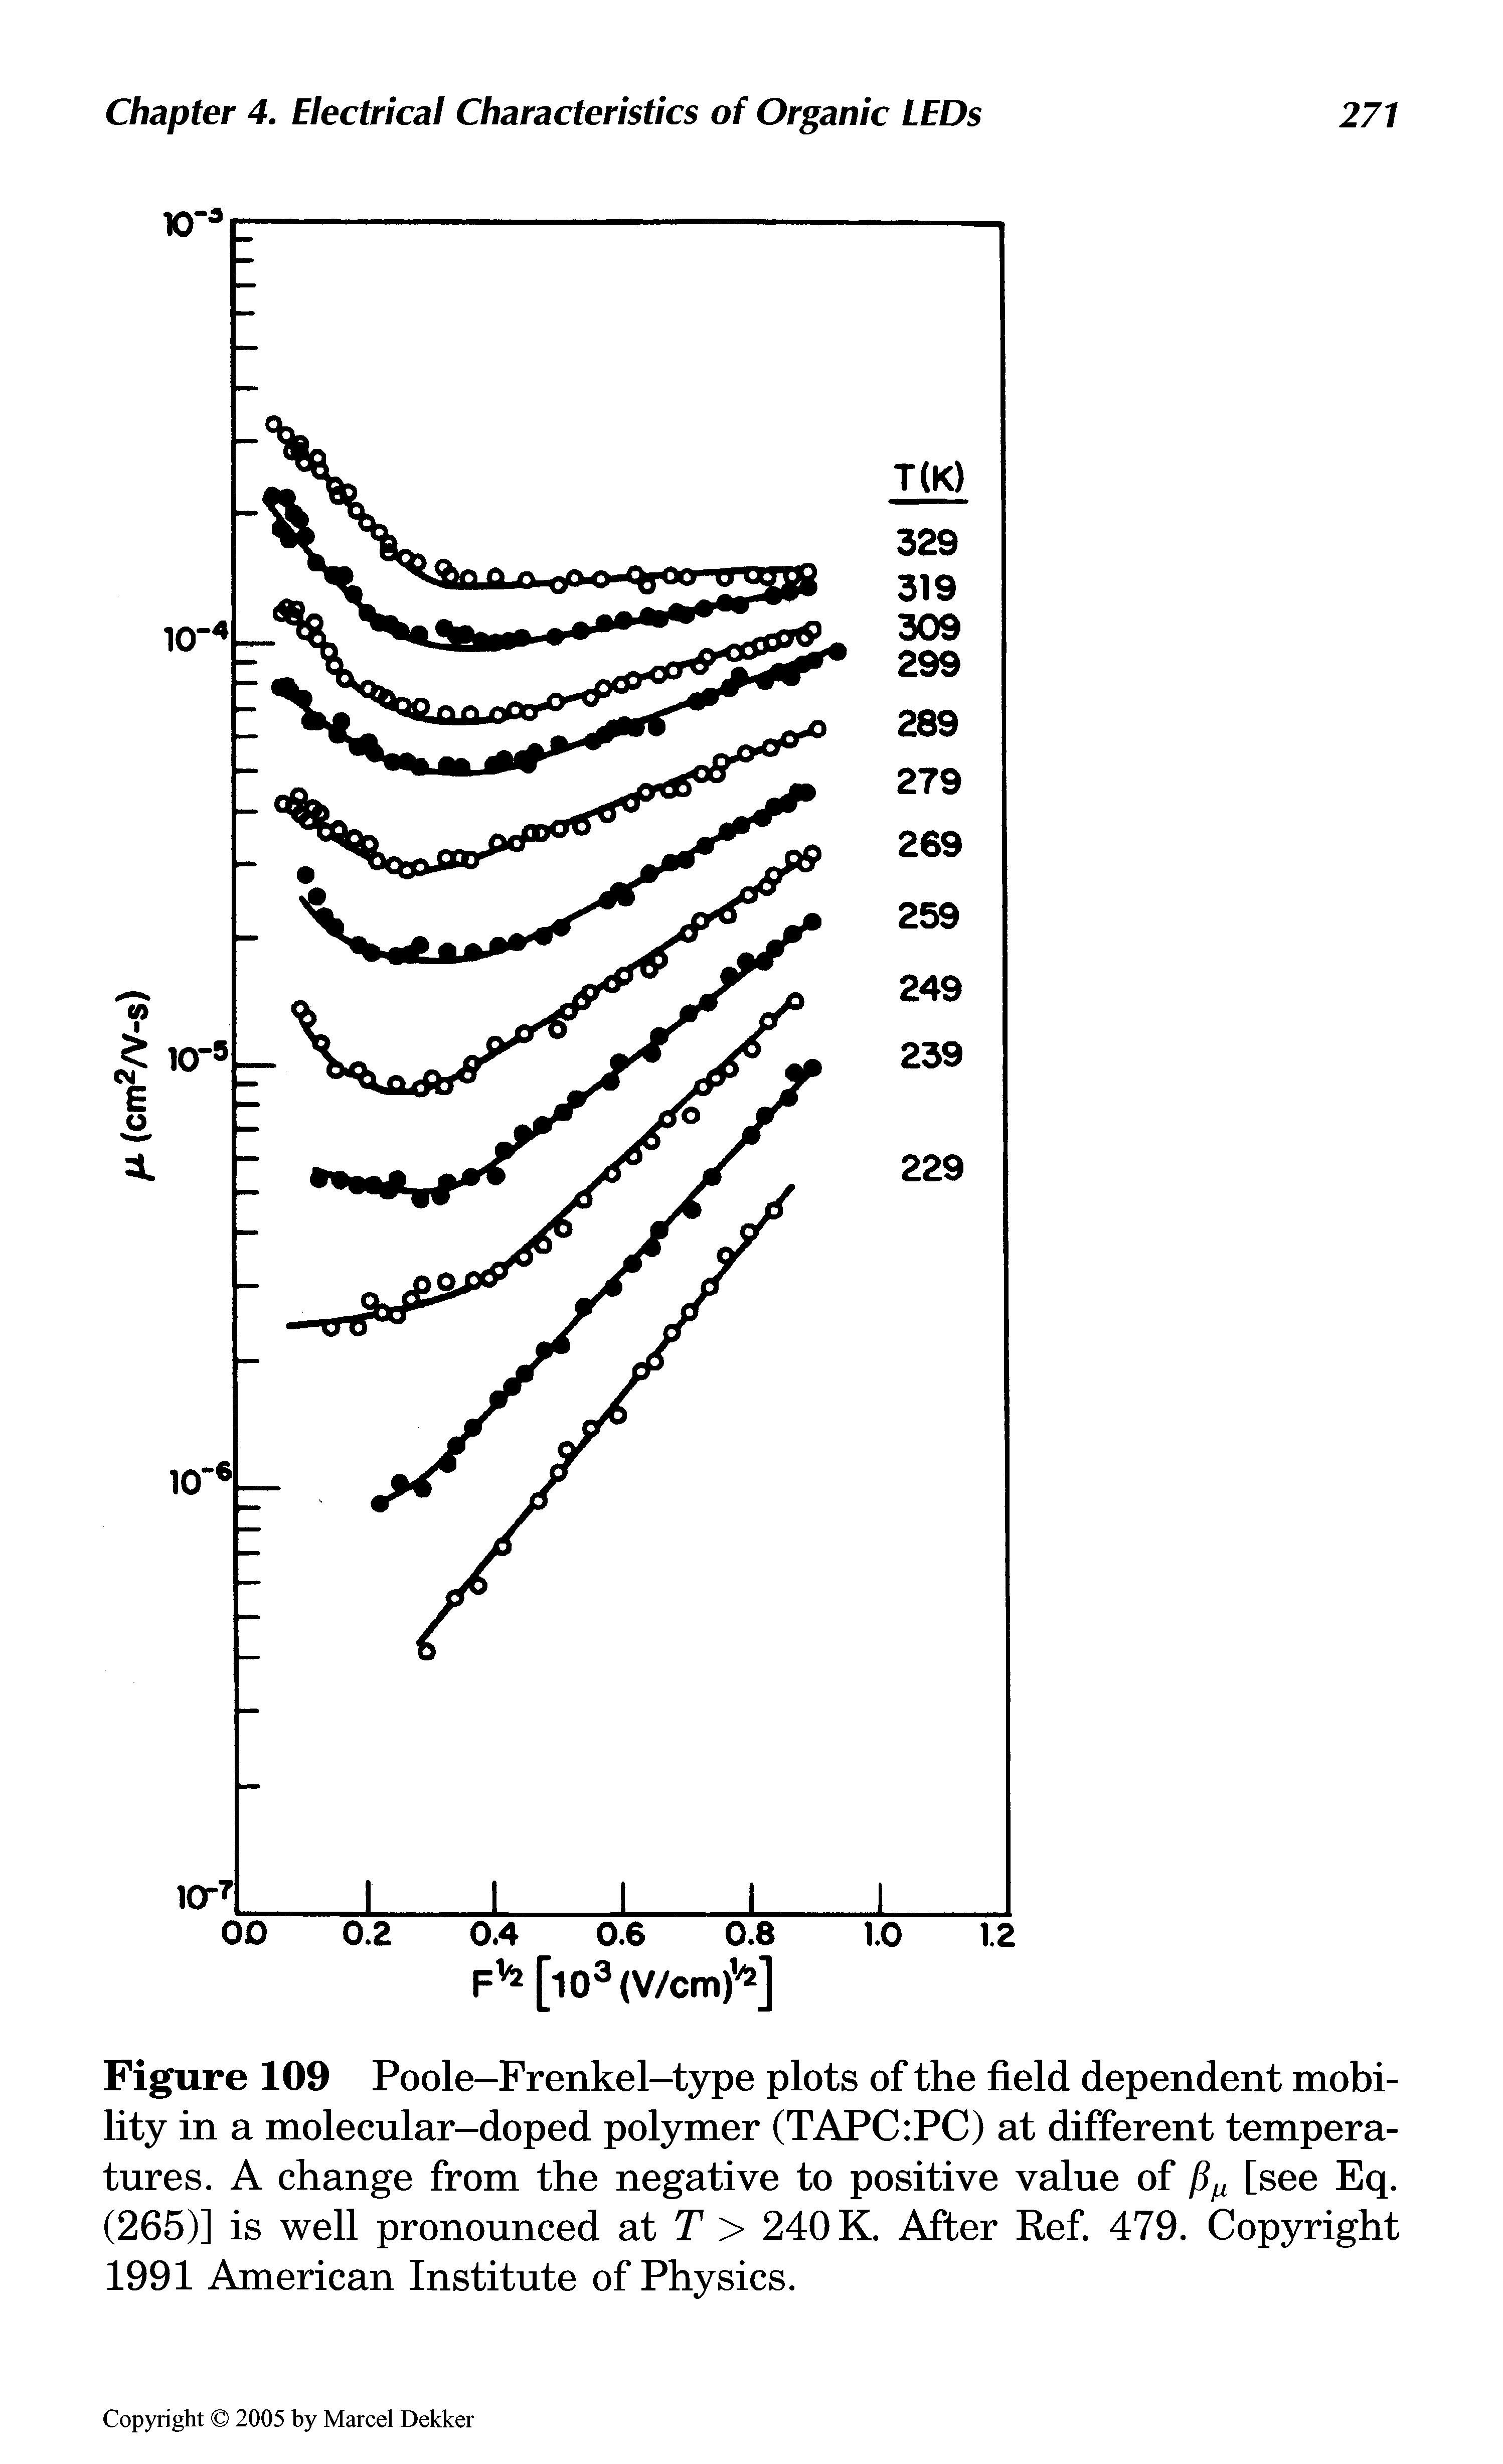 Figure 109 Poole-Frenkel-type plots of the field dependent mobility in a molecular-doped polymer (TAPC PC) at different temperatures. A change from the negative to positive value of [see Eq. (265)] is well pronounced at T > 240 K. After Ref. 479. Copyright 1991 American Institute of Physics.